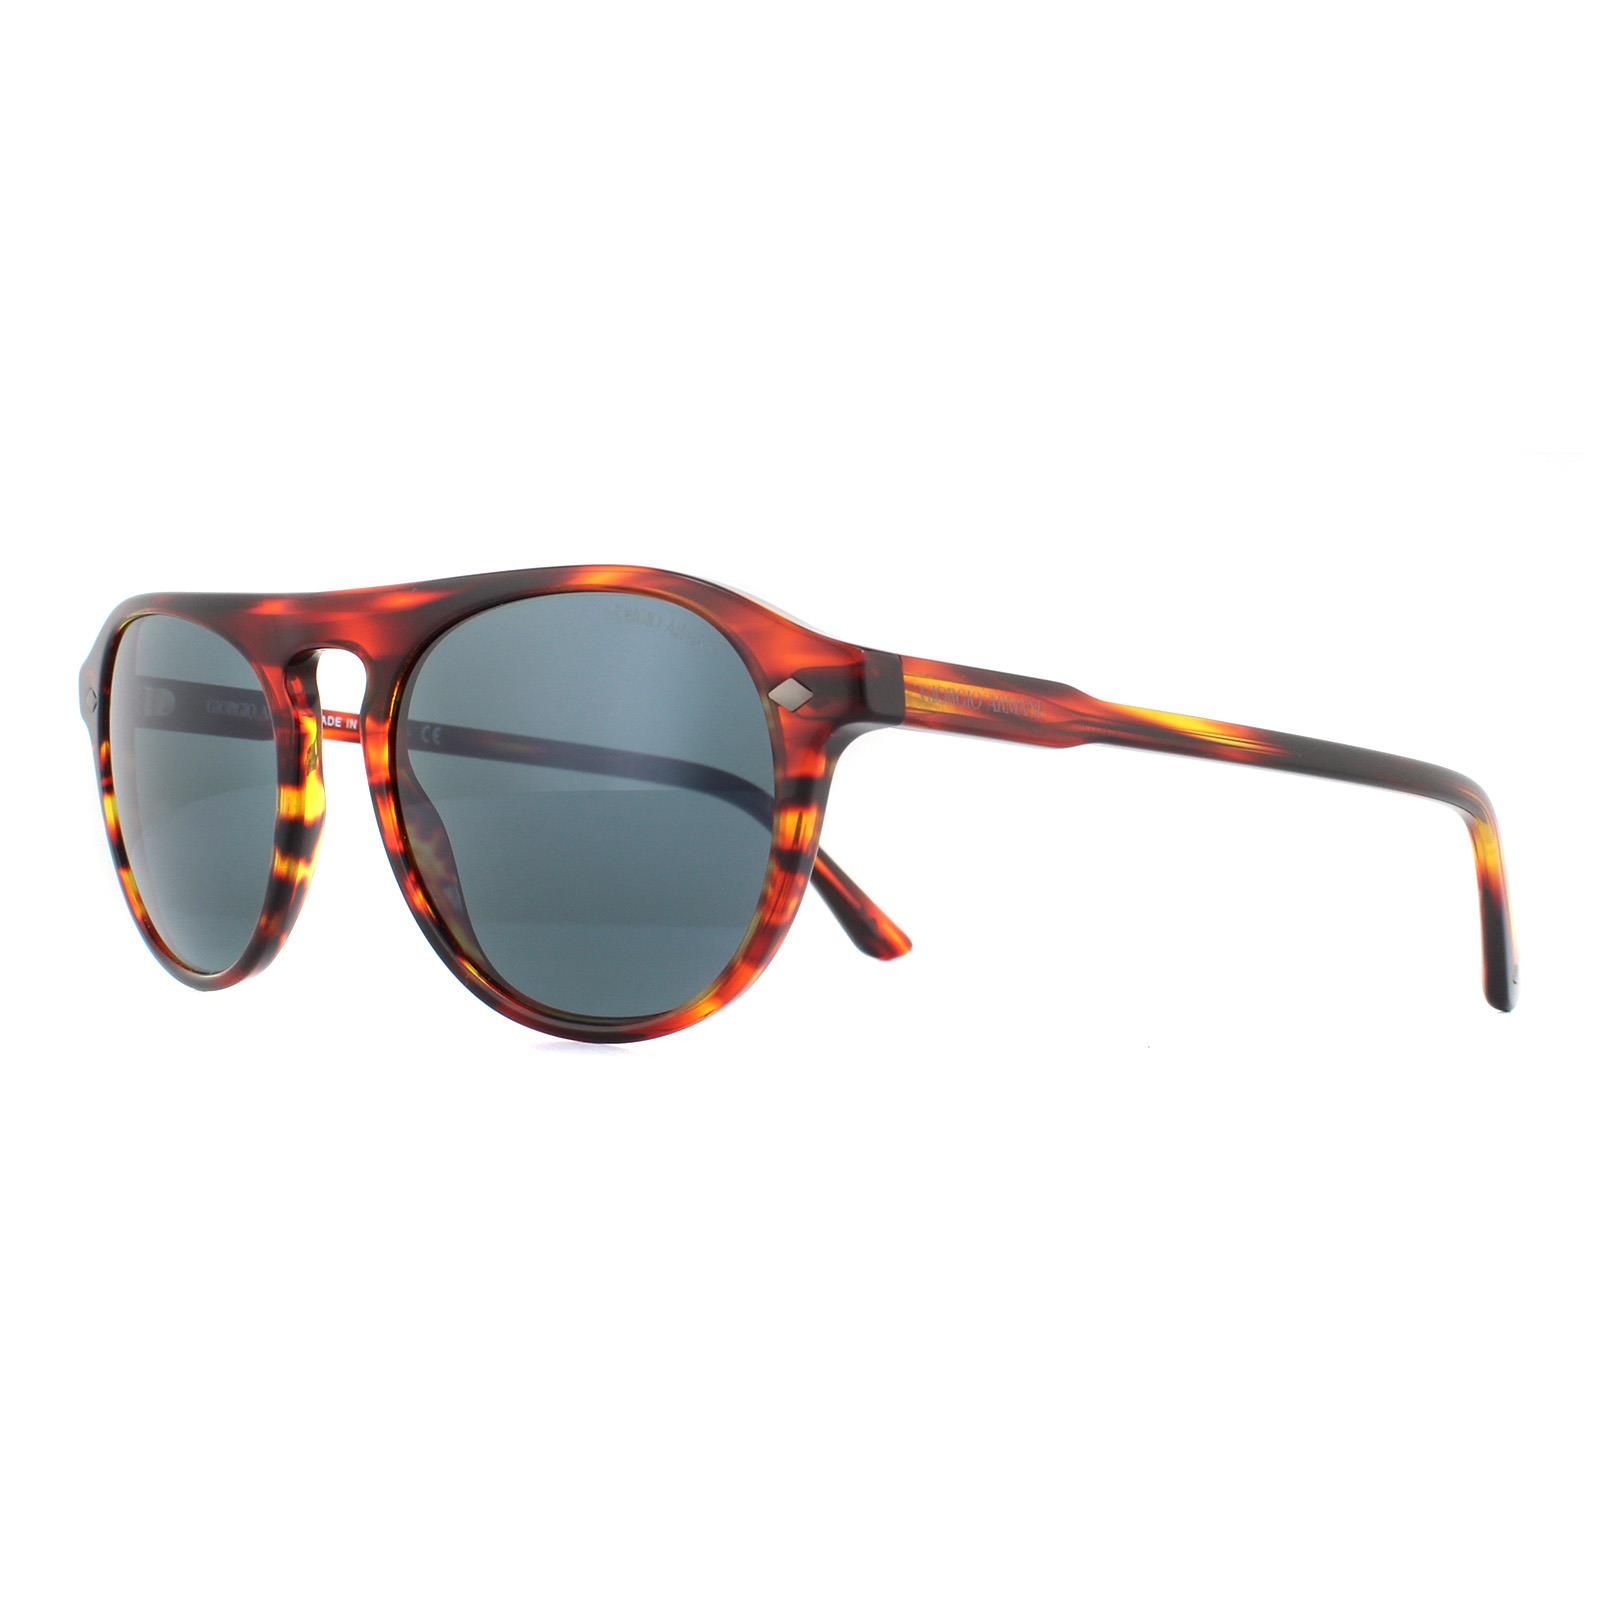 Giorgio Armani Sunglasses AR8096 5580R5 Striped Red Grey have a plastic frame which is a Aviator shape and is for men